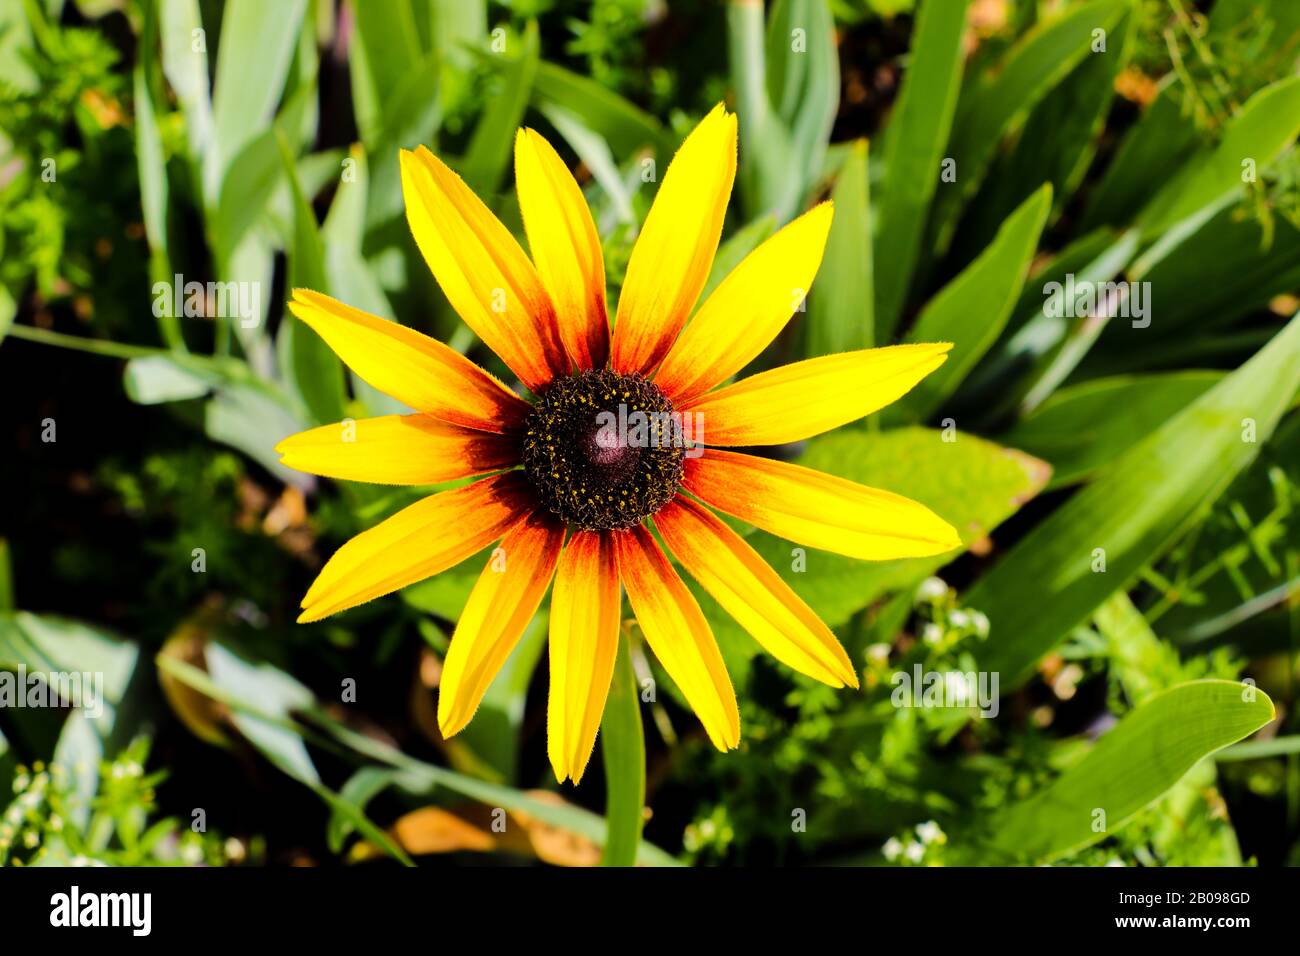 A Black-eyed Susan Rudbeckia hirta flower in the midst of a flower bed Stock Photo